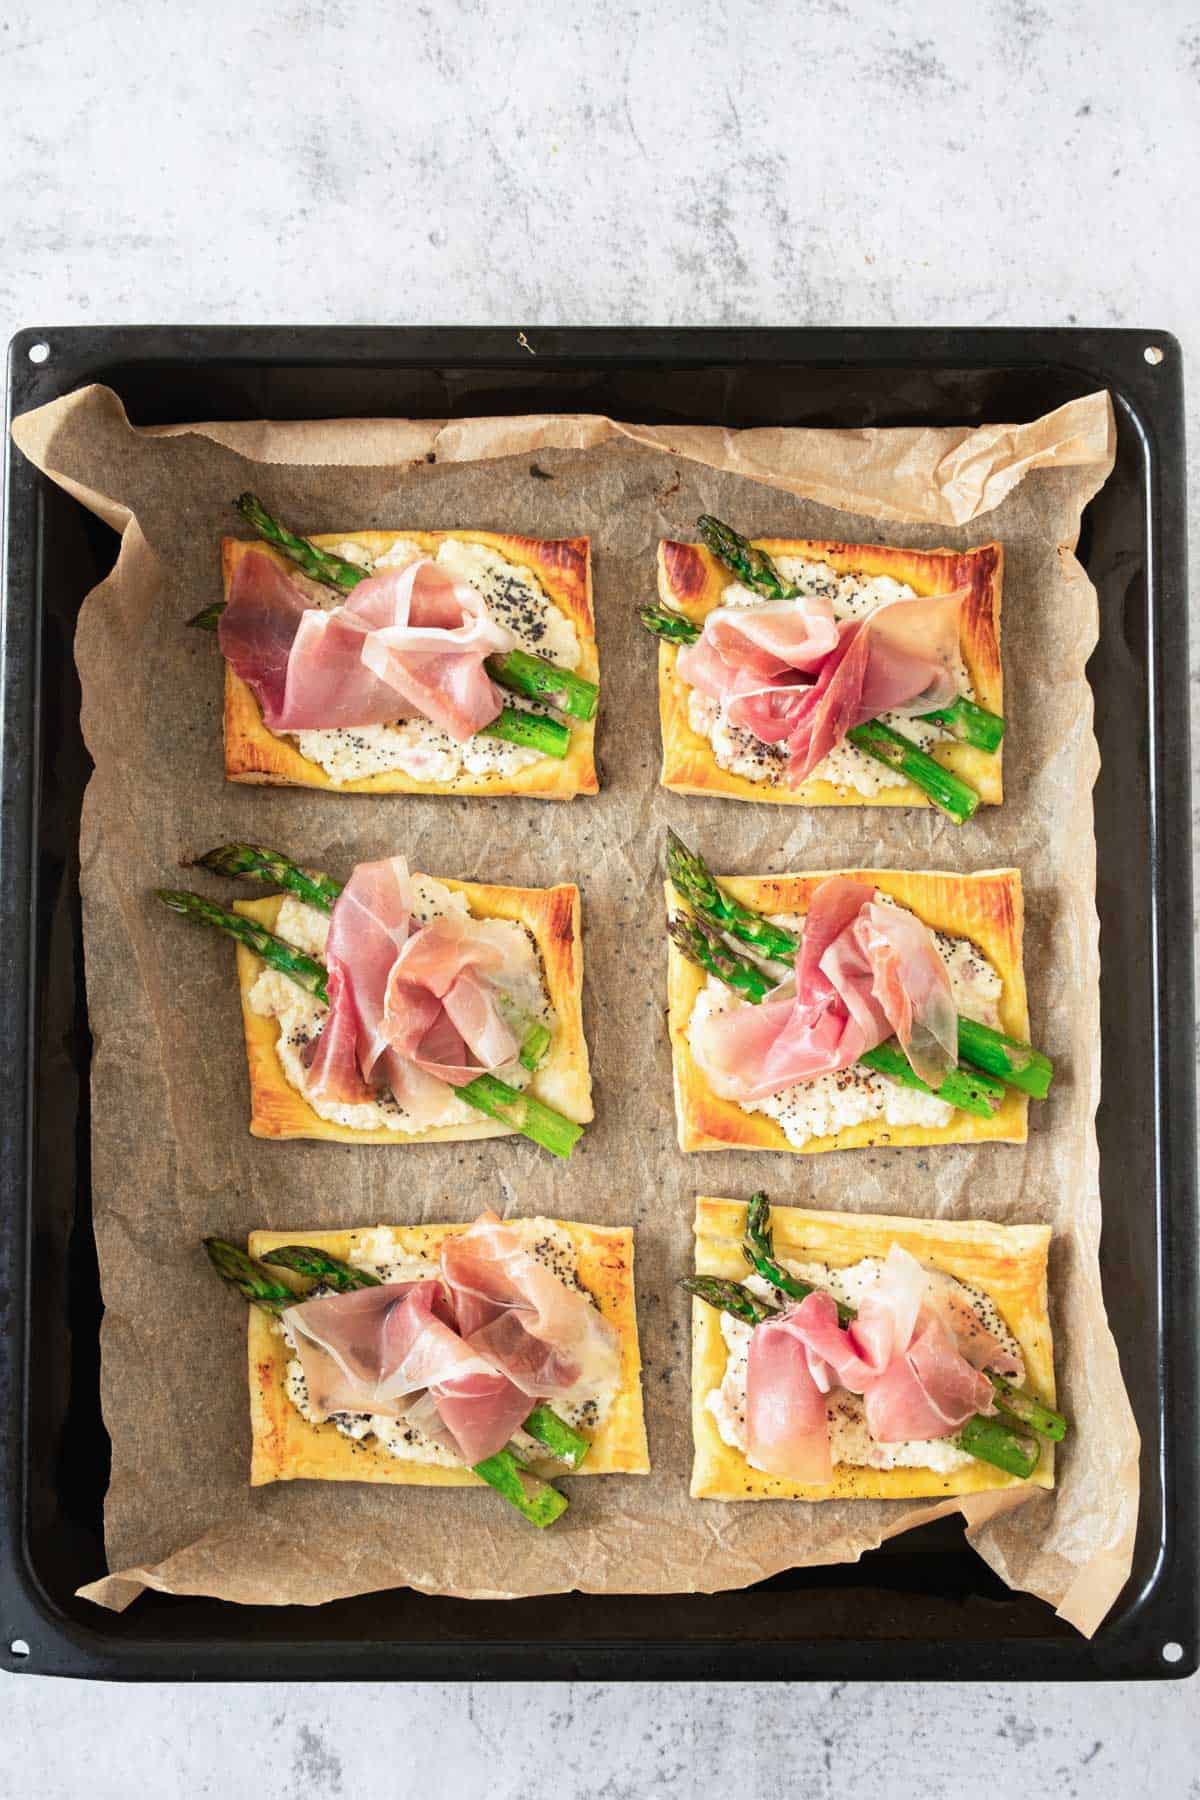 A tray of freshly baked puff pastry tarts with asparagus and prosciutto on a parchment paper.